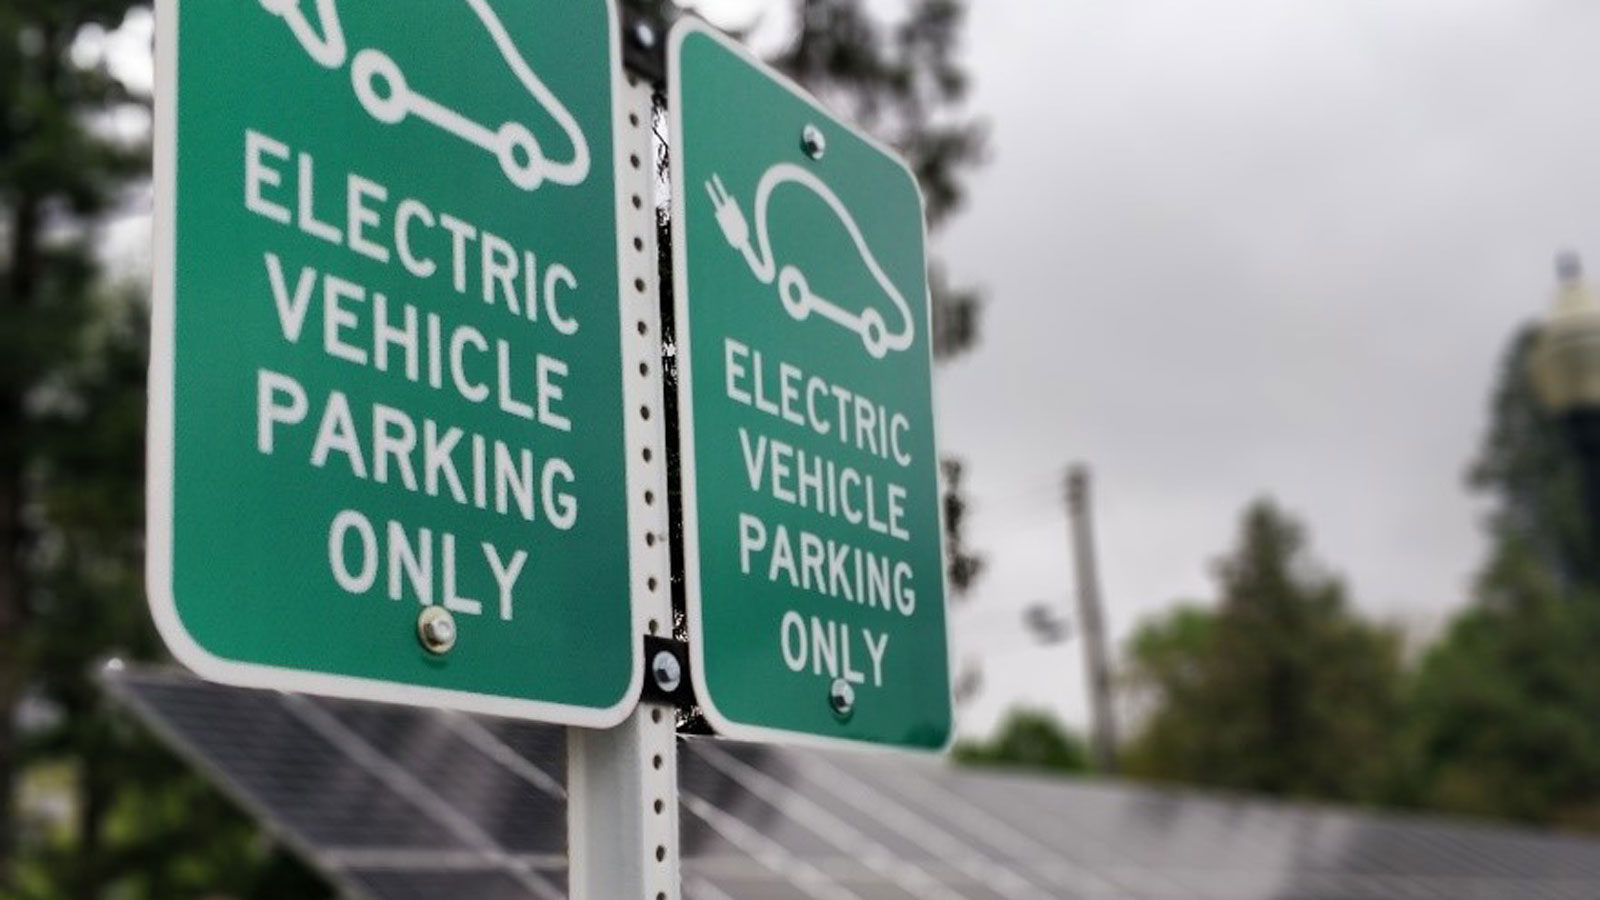 <h3>ELECTRIC VEHICLES</h3><h5>There were <span class="slideshowHighlight">over 361,000 electric vehicles</span> sold in the U.S. in 2018, compared to virtually none in 2009. In the first seven months of 2019, electric vehicle sales were up an additional 14 percent over that same period in 2018.</h5>